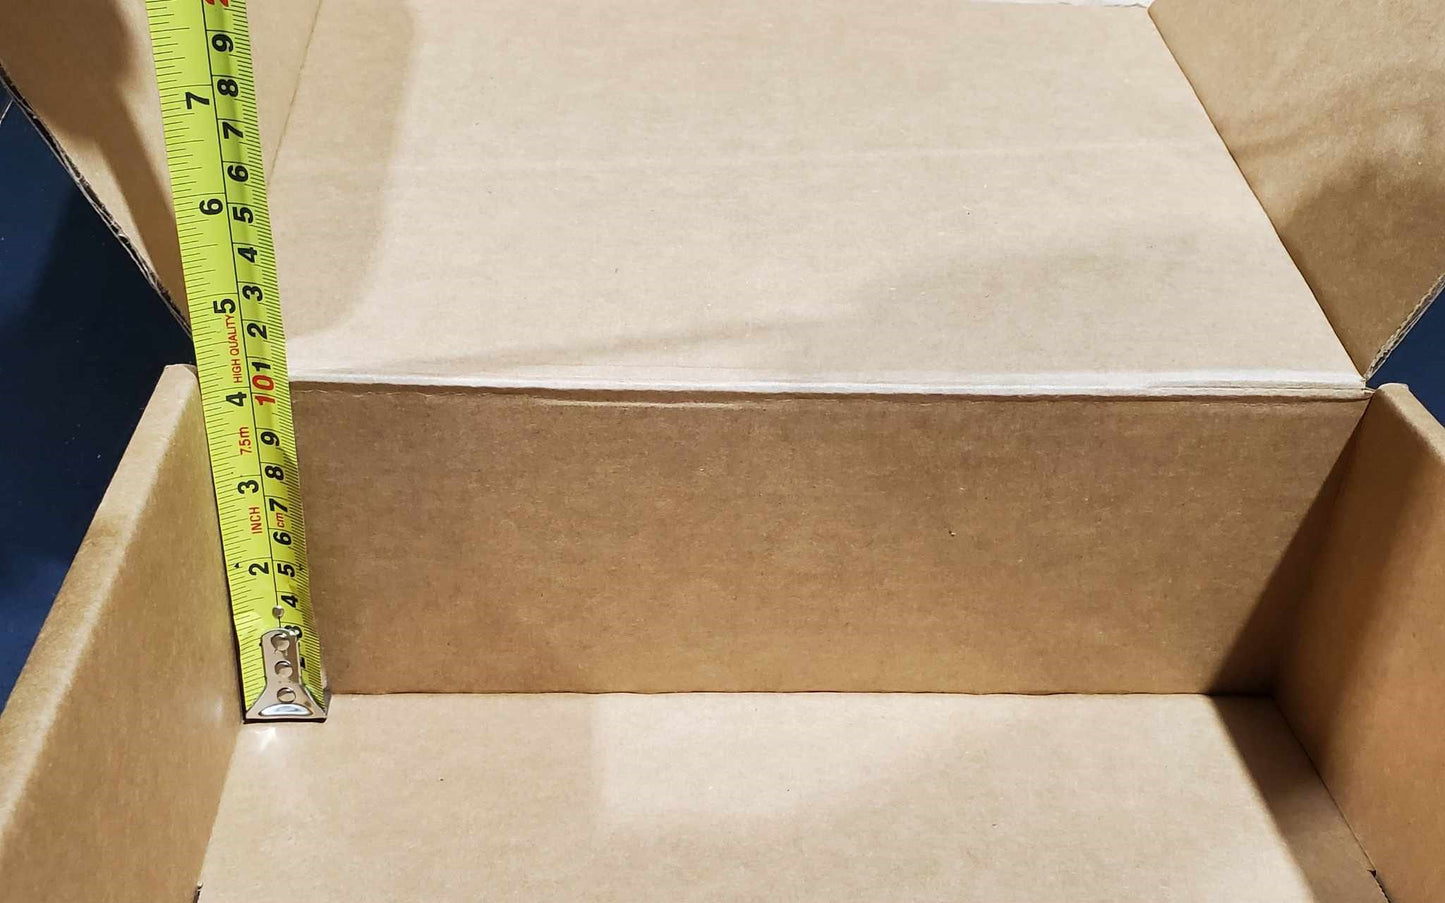 (NEW SMALLER SIZE! ) BEST Shipping and Replacement SHOE BOXES - HEAVY DUTY - 12" X 9" X 4.125" - Self Locking - Repackaging Message on The Box - Fast, Easy to Build